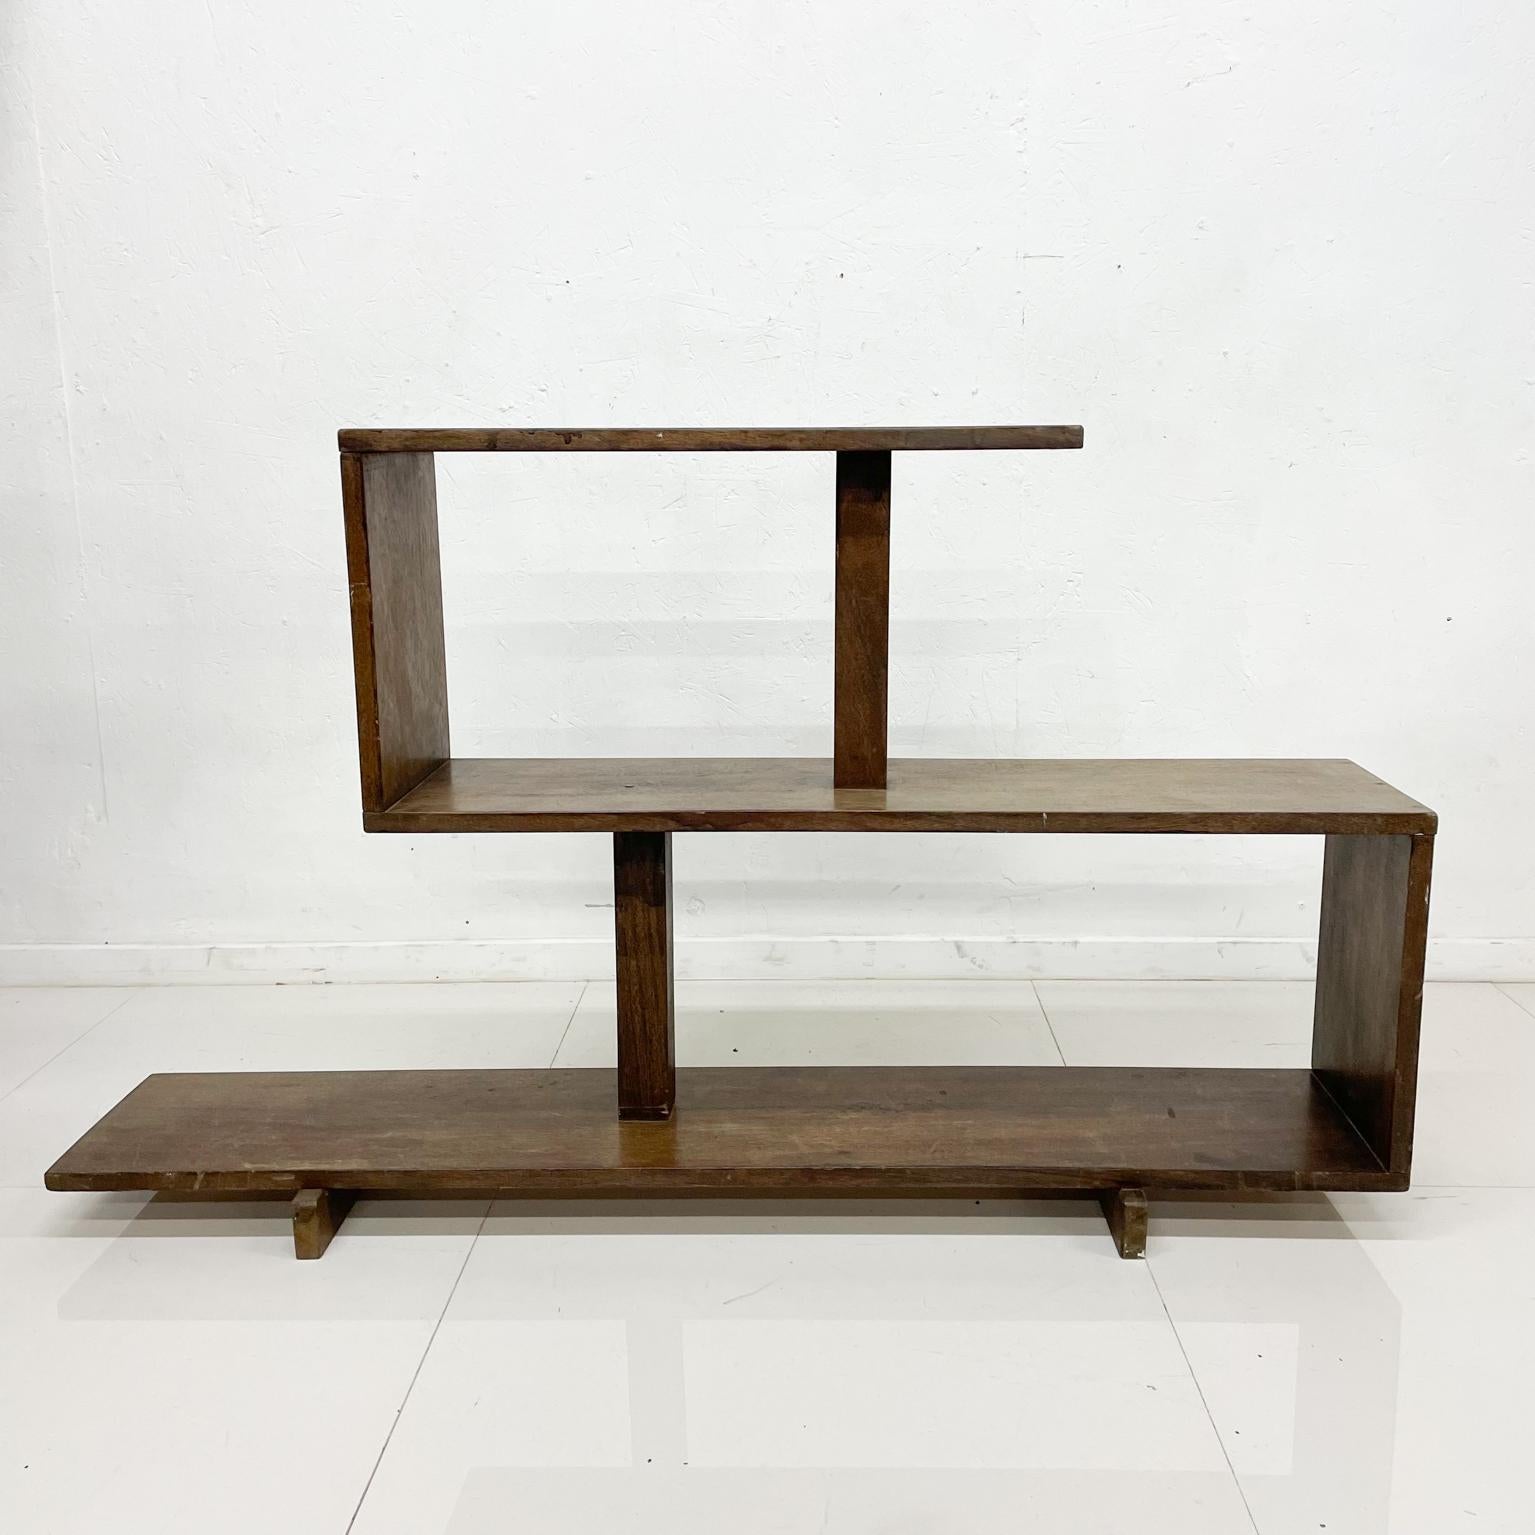 Bookcase
Sculptural S shape bookcase modern shelves in Solid Mahogany 1960s midcentury vintage
Unmarked
Measures: 28.75 H x 11.5 D x 48 W inches
In original unrestored preowned condition. Wear and use present.
Refer to images